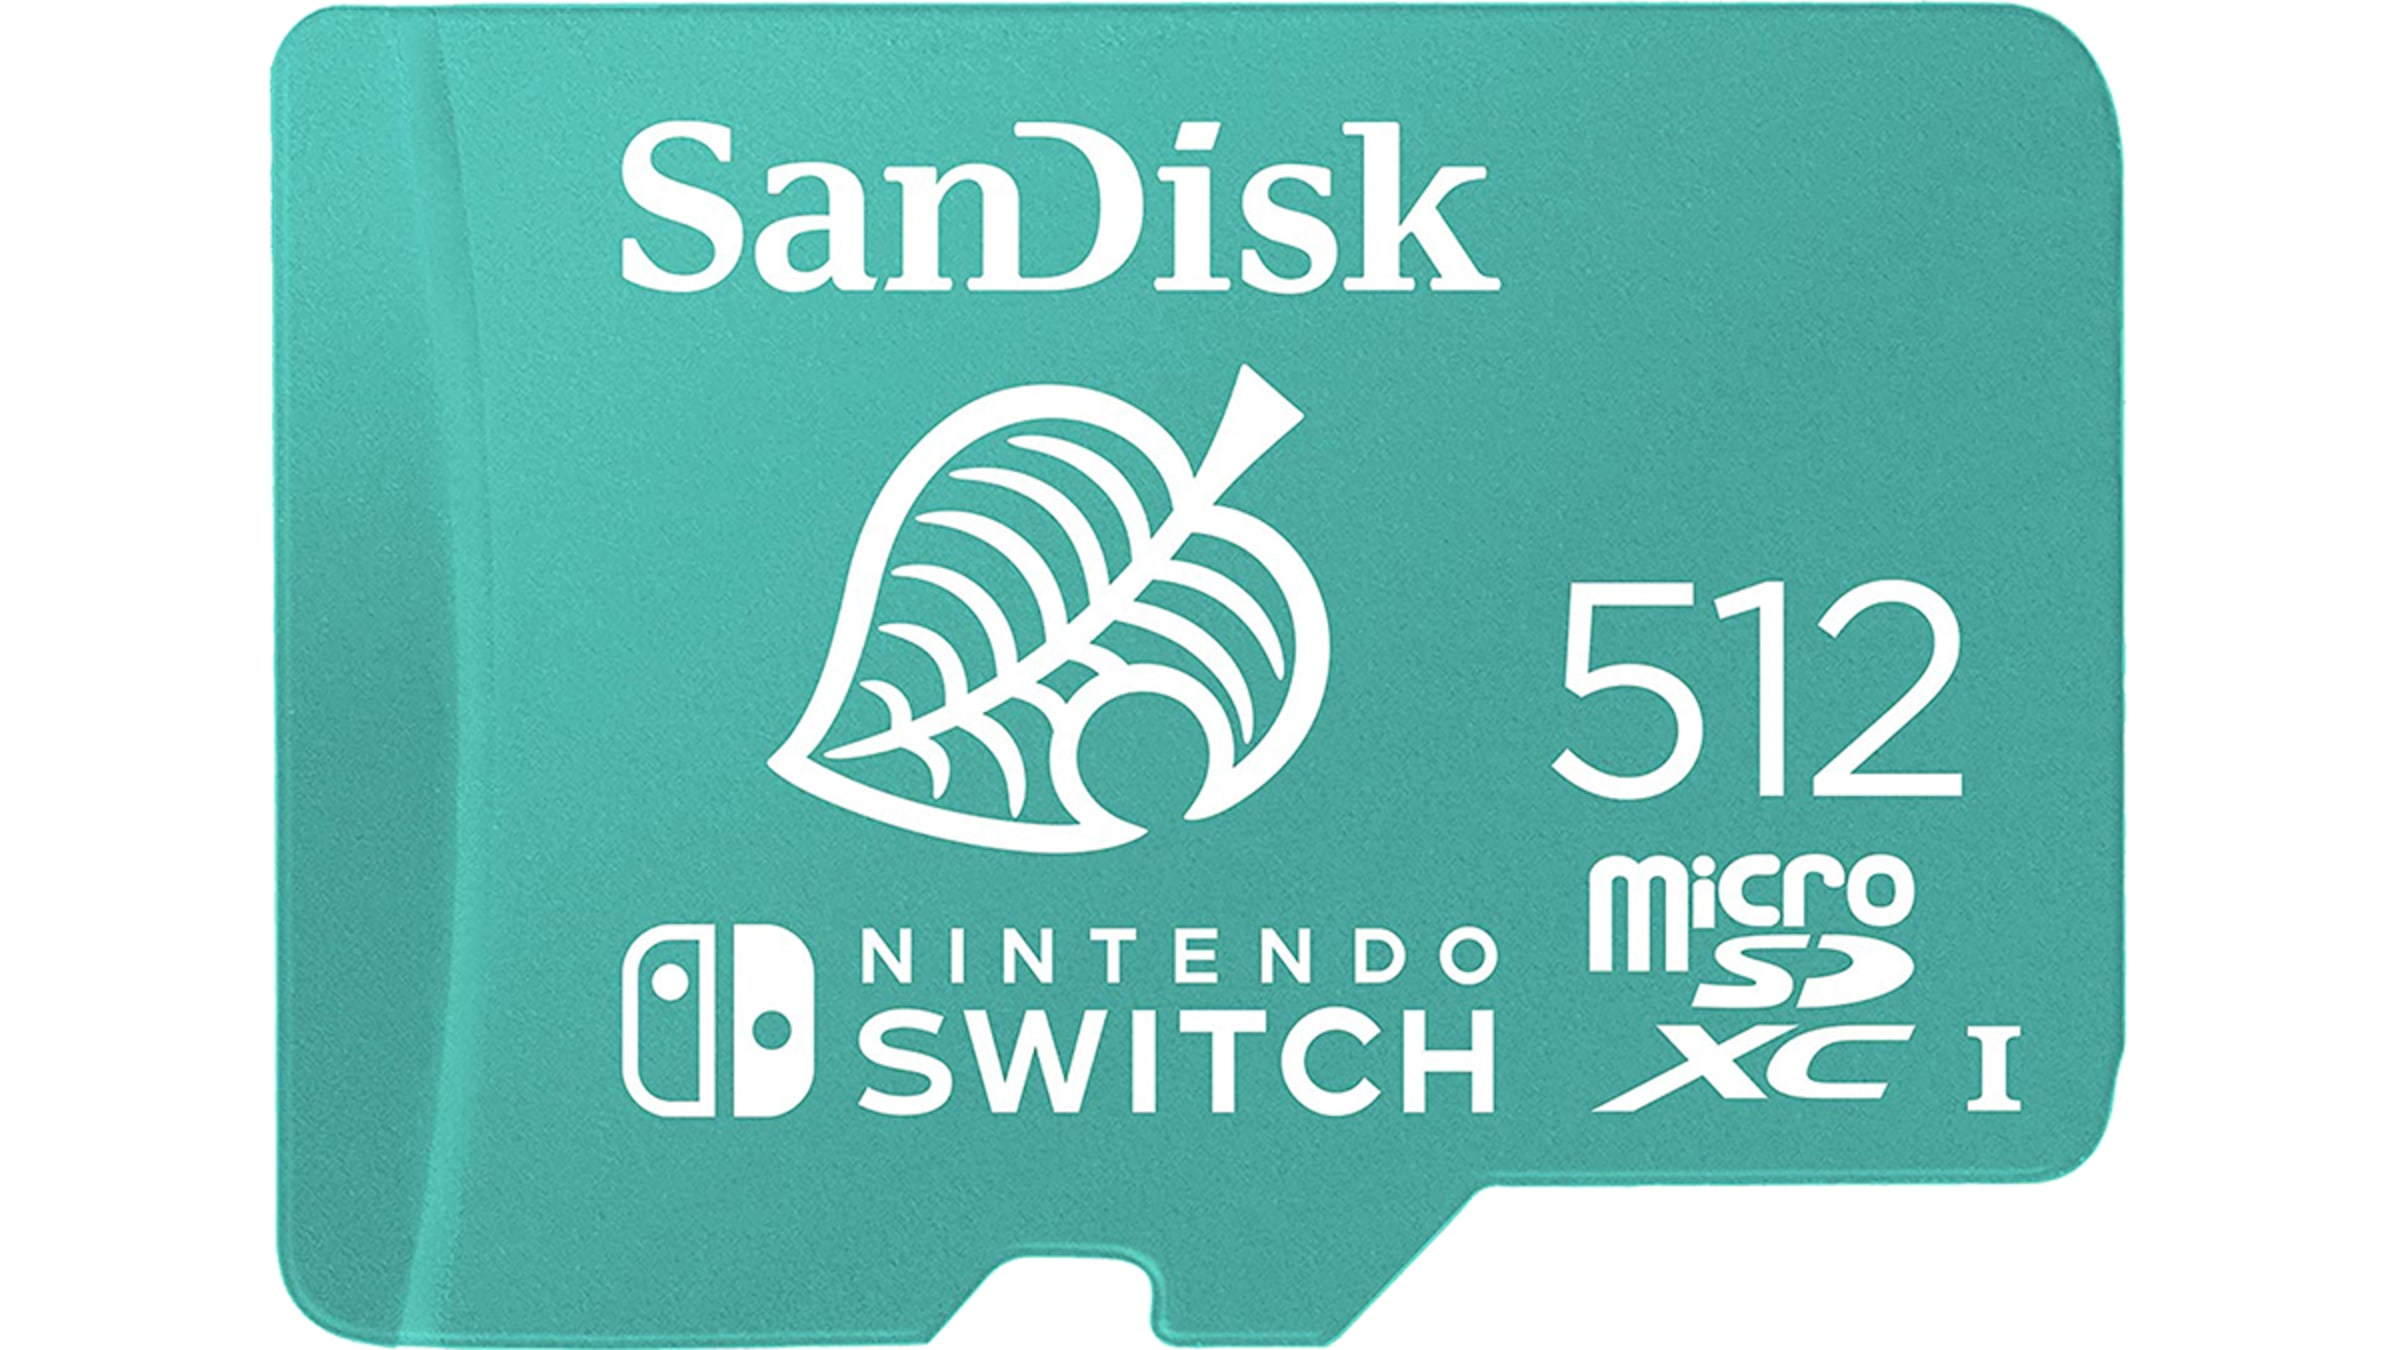 Boost your Switch's storage with Kingston's 512GB microSD Card